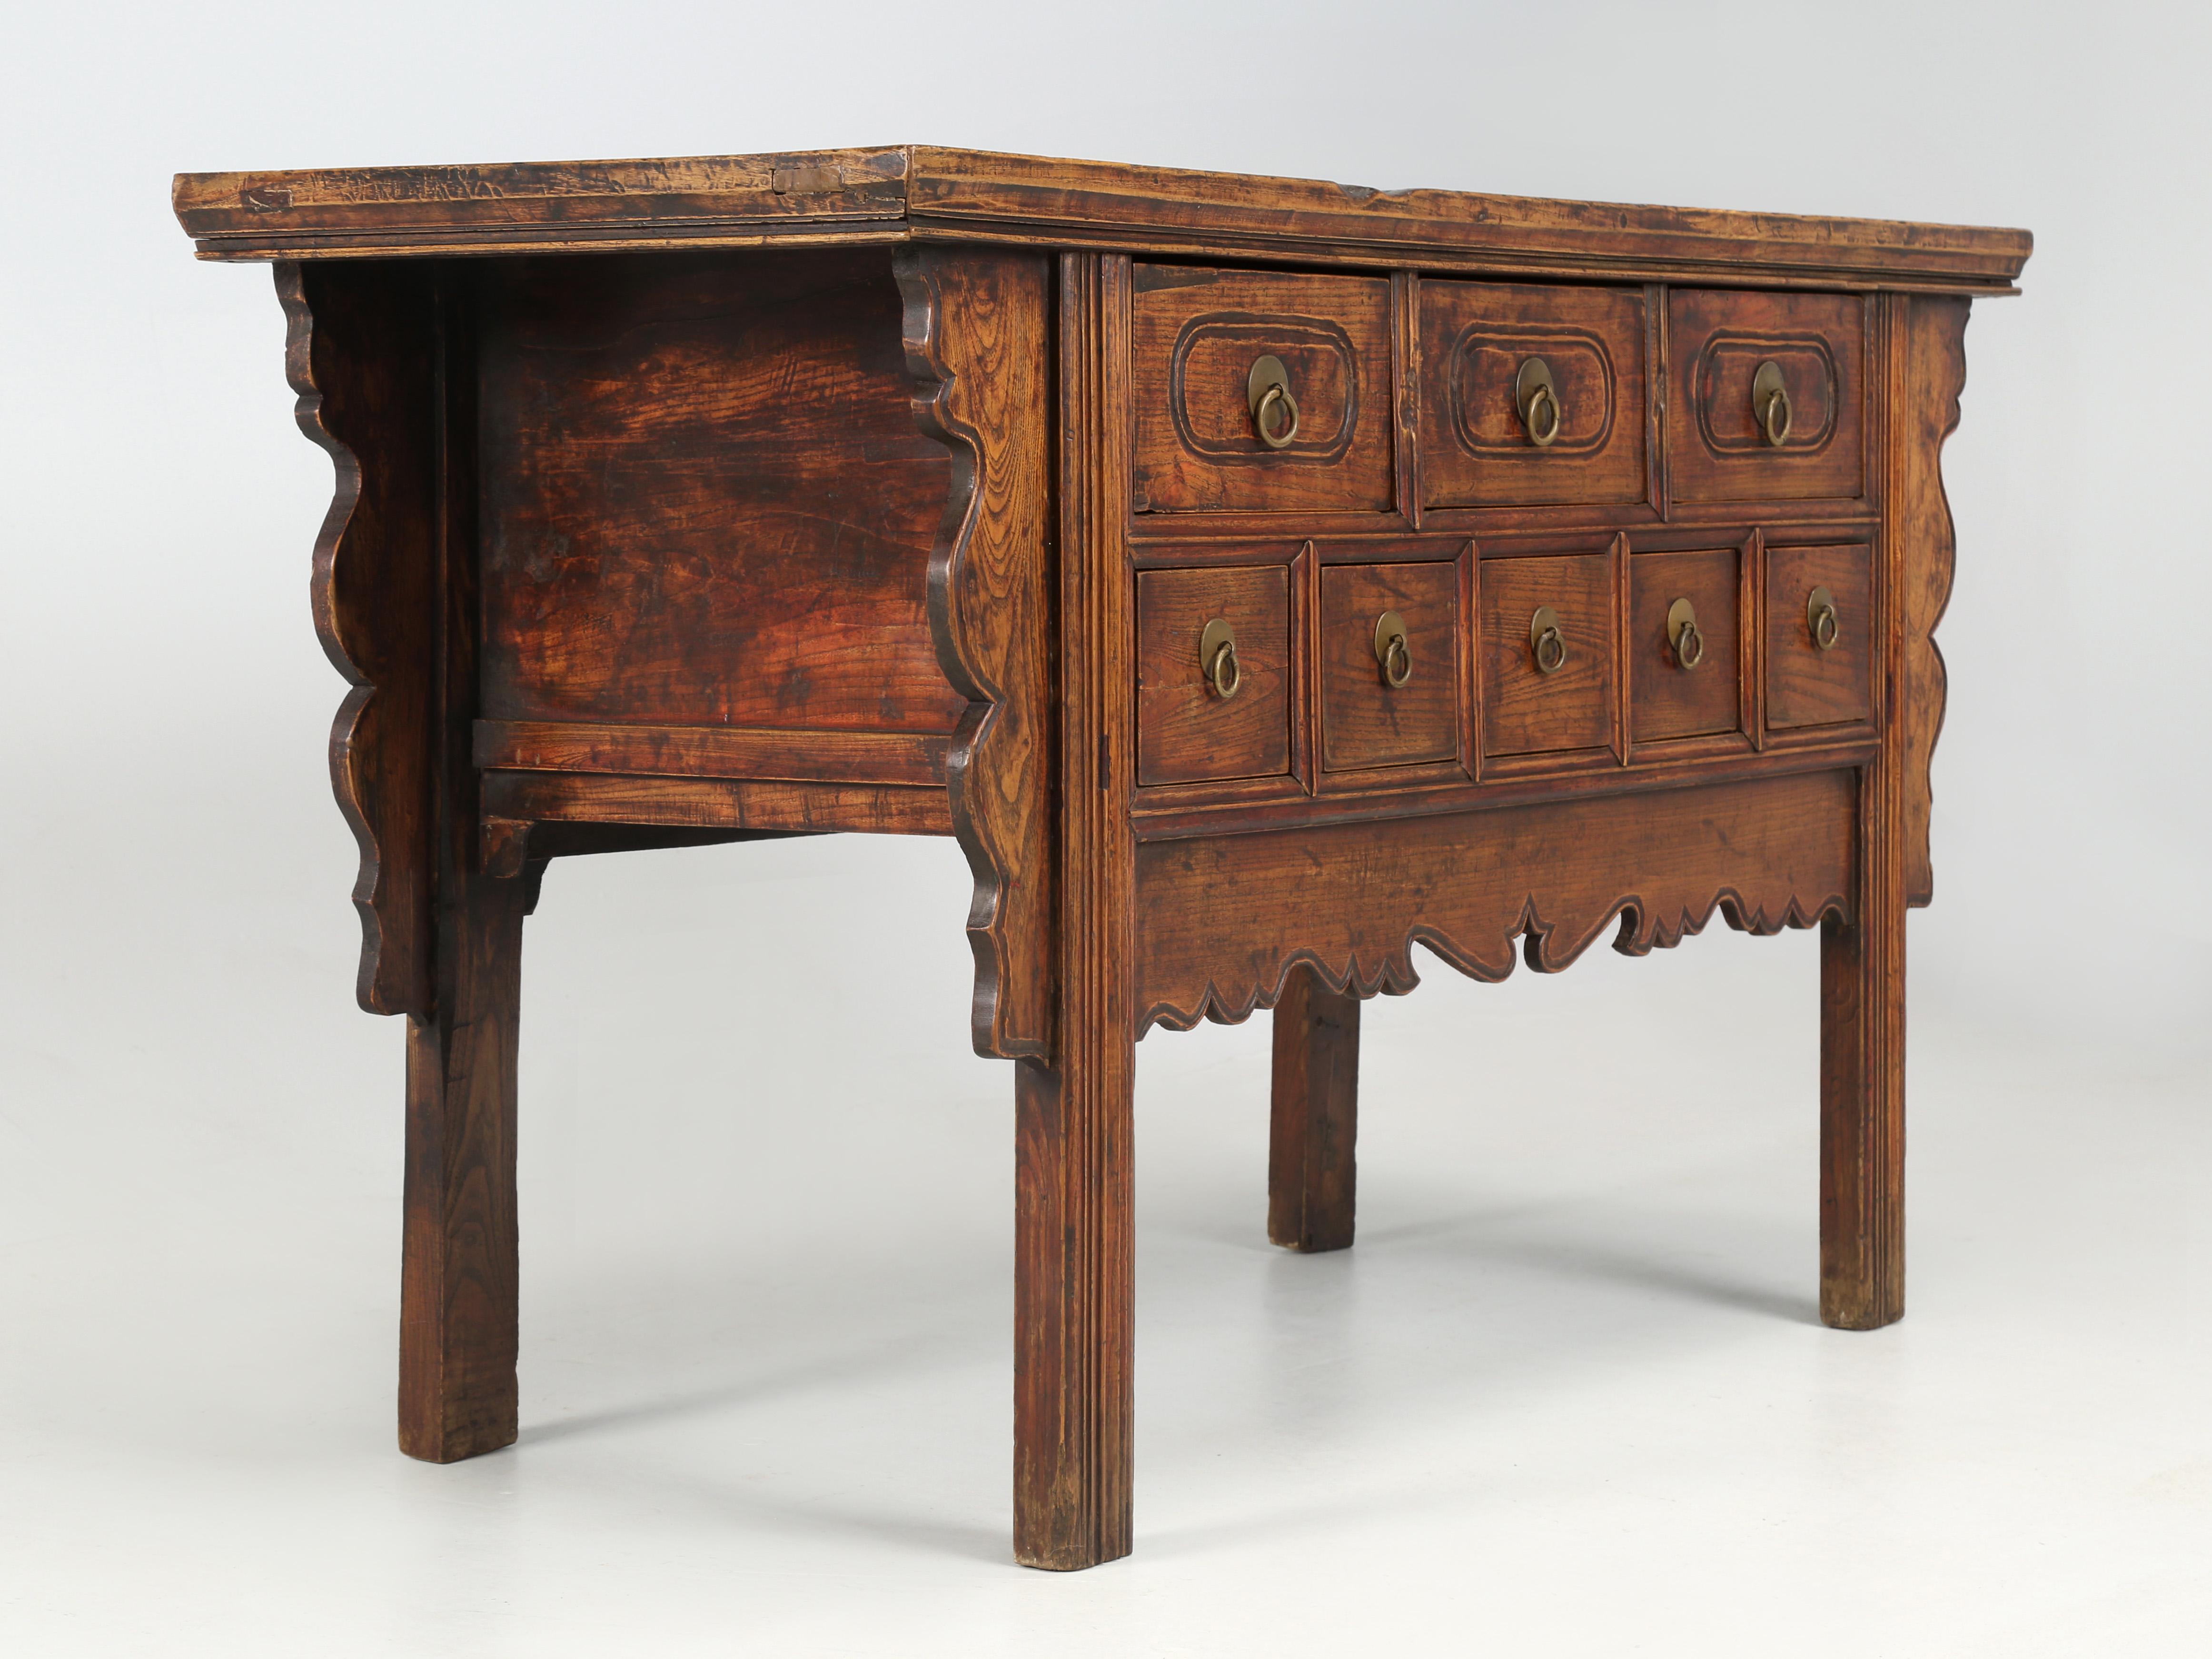 Hand-Carved Antique Chinese Altar Table with (8) Drawers circa 1900 Restored Condition For Sale